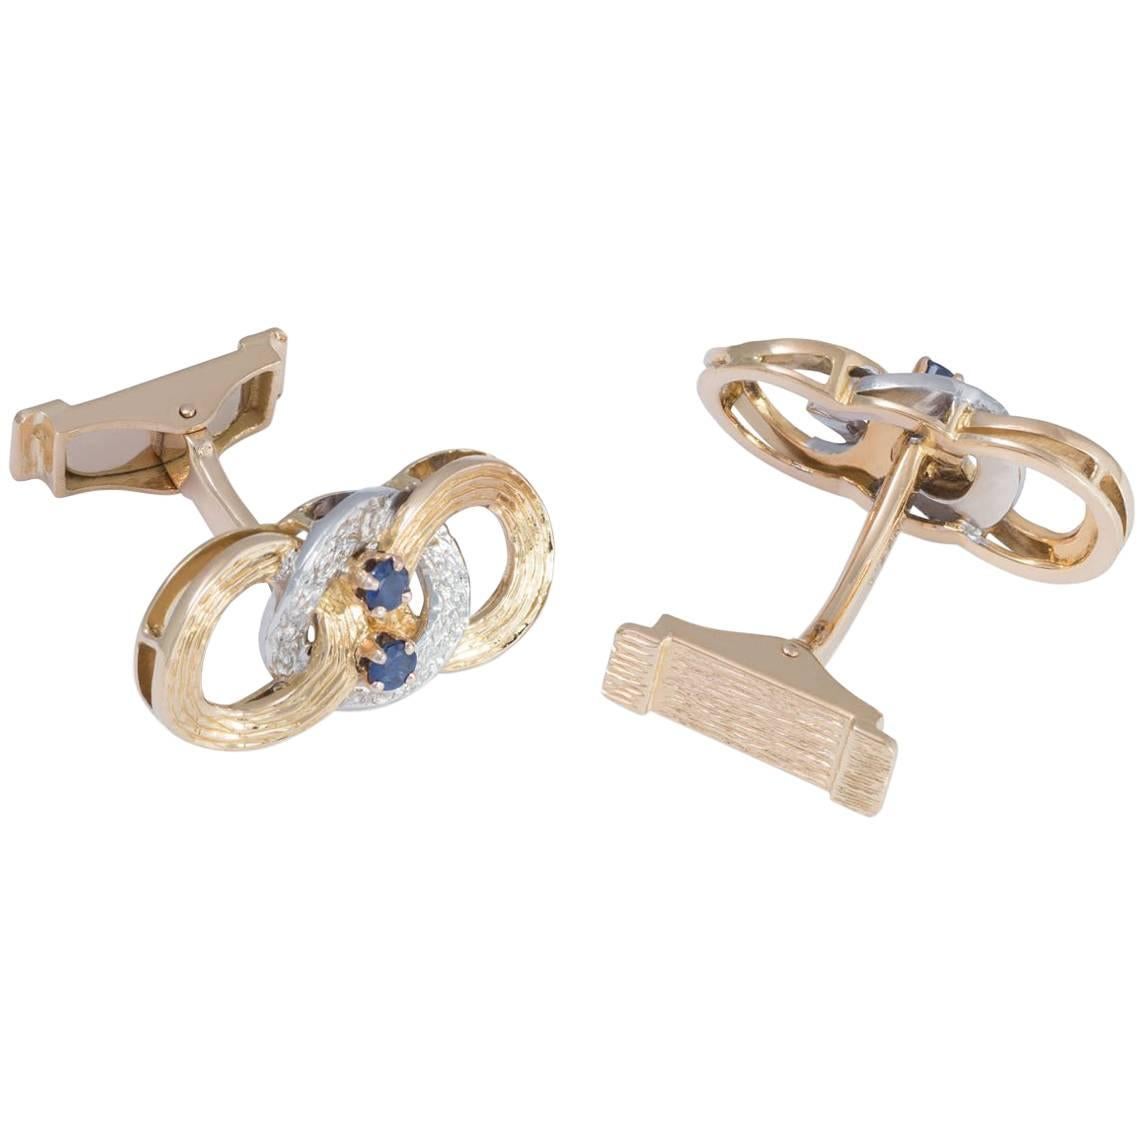 Daou Yellow Gold and White Gold Hand Textured Circle Link Sapphire Cufflinks